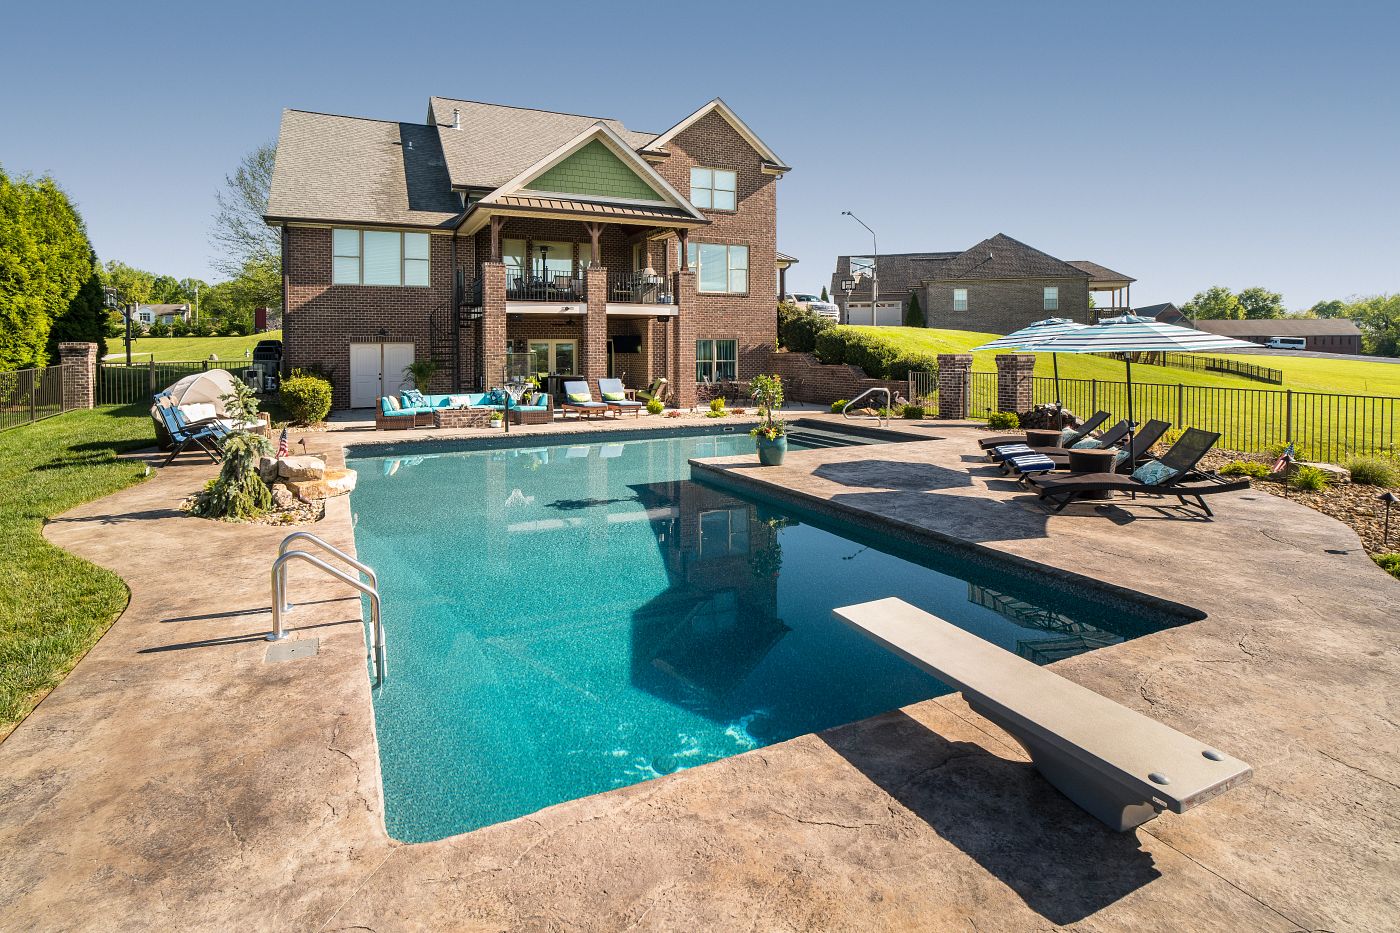 large vinyl liner pool in southern backyard on a hill